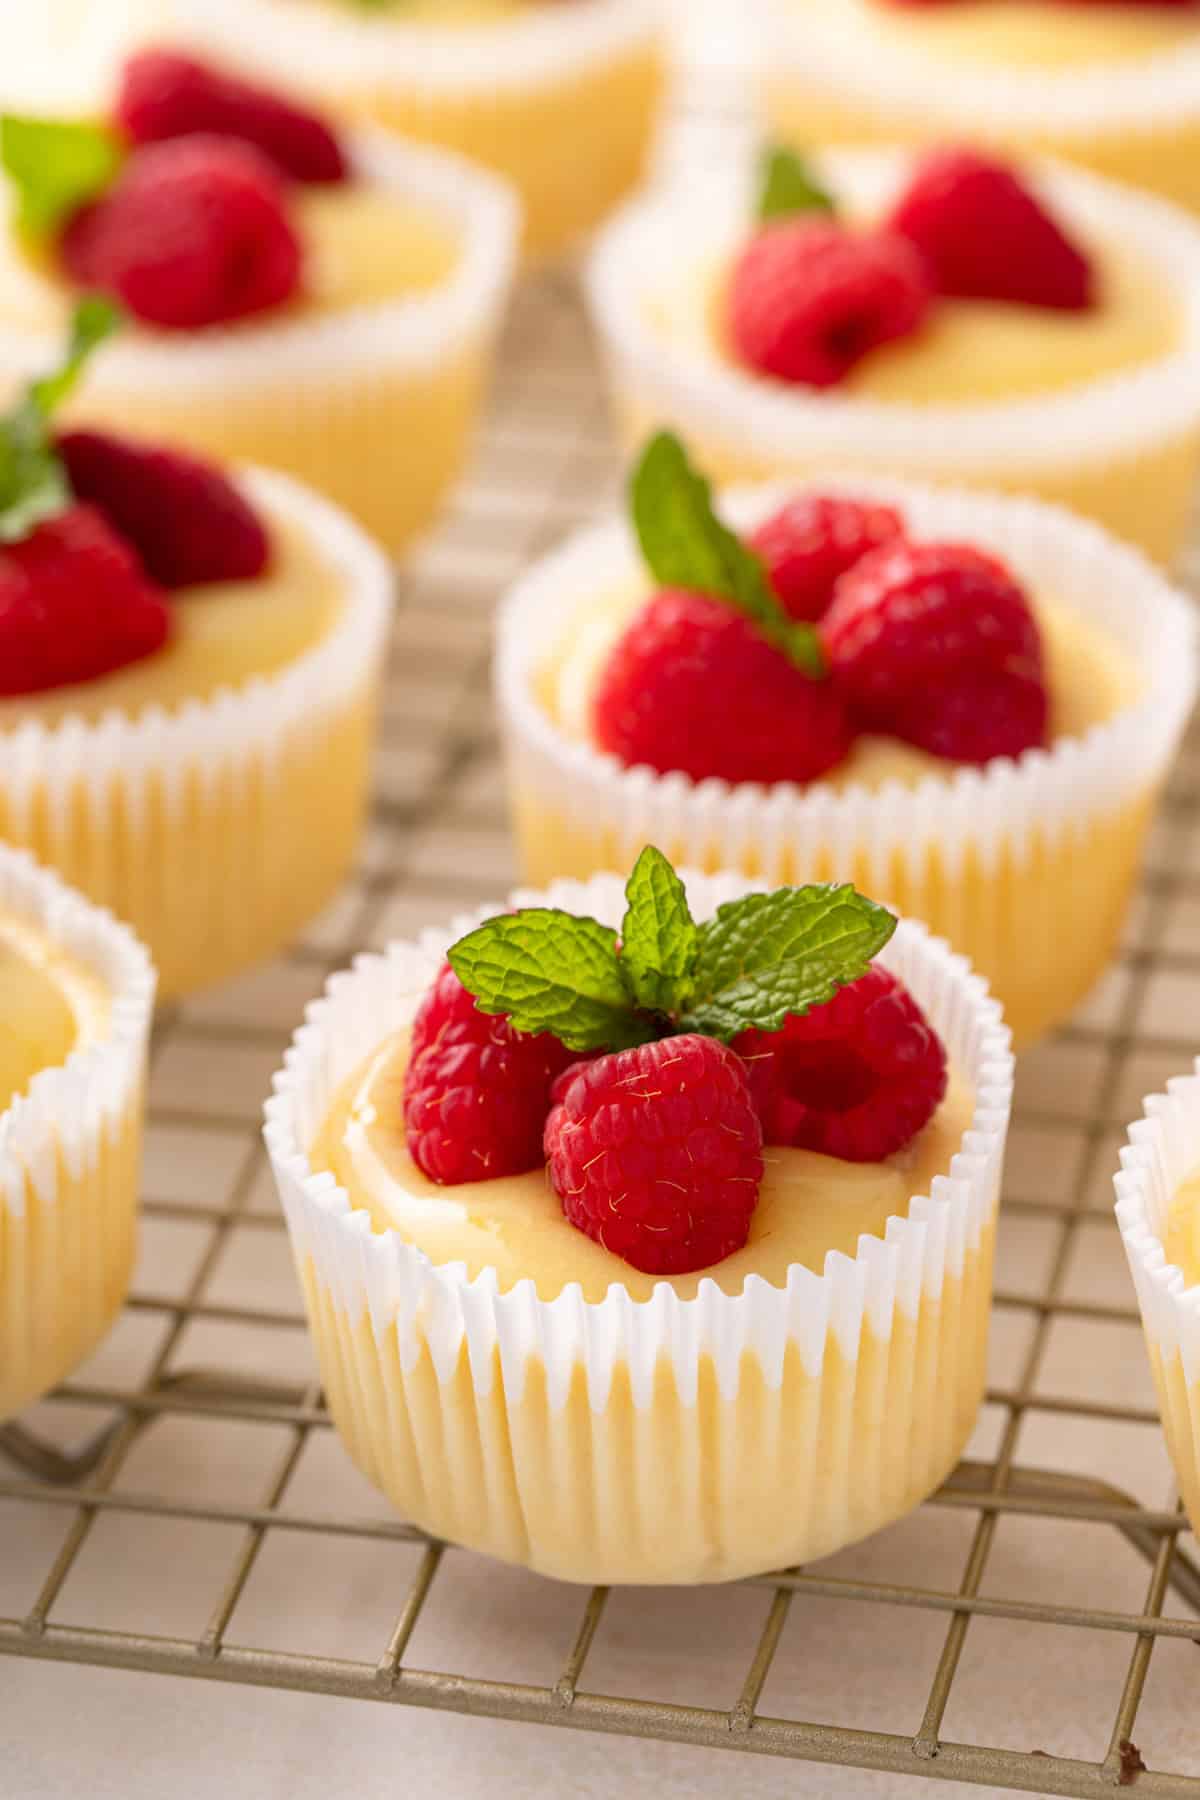 Mini lemon cheesecakes topped with lemon curd and fresh raspberries on a wire rack.